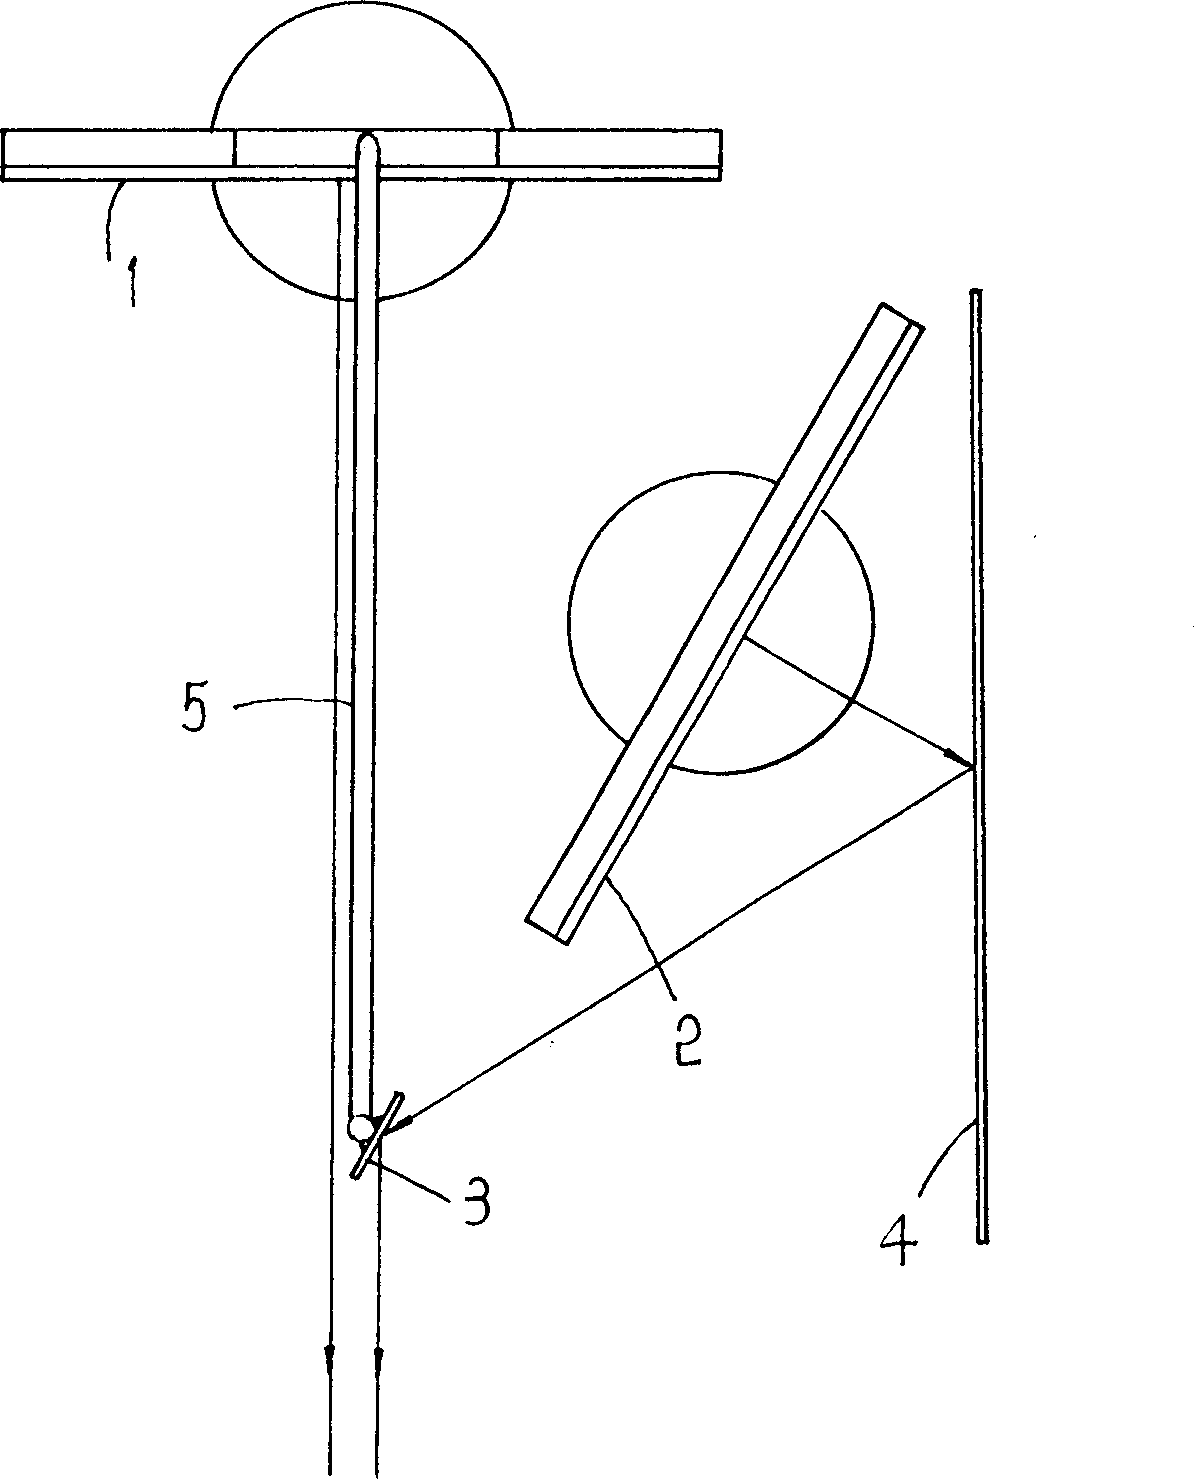 Stereo image display device